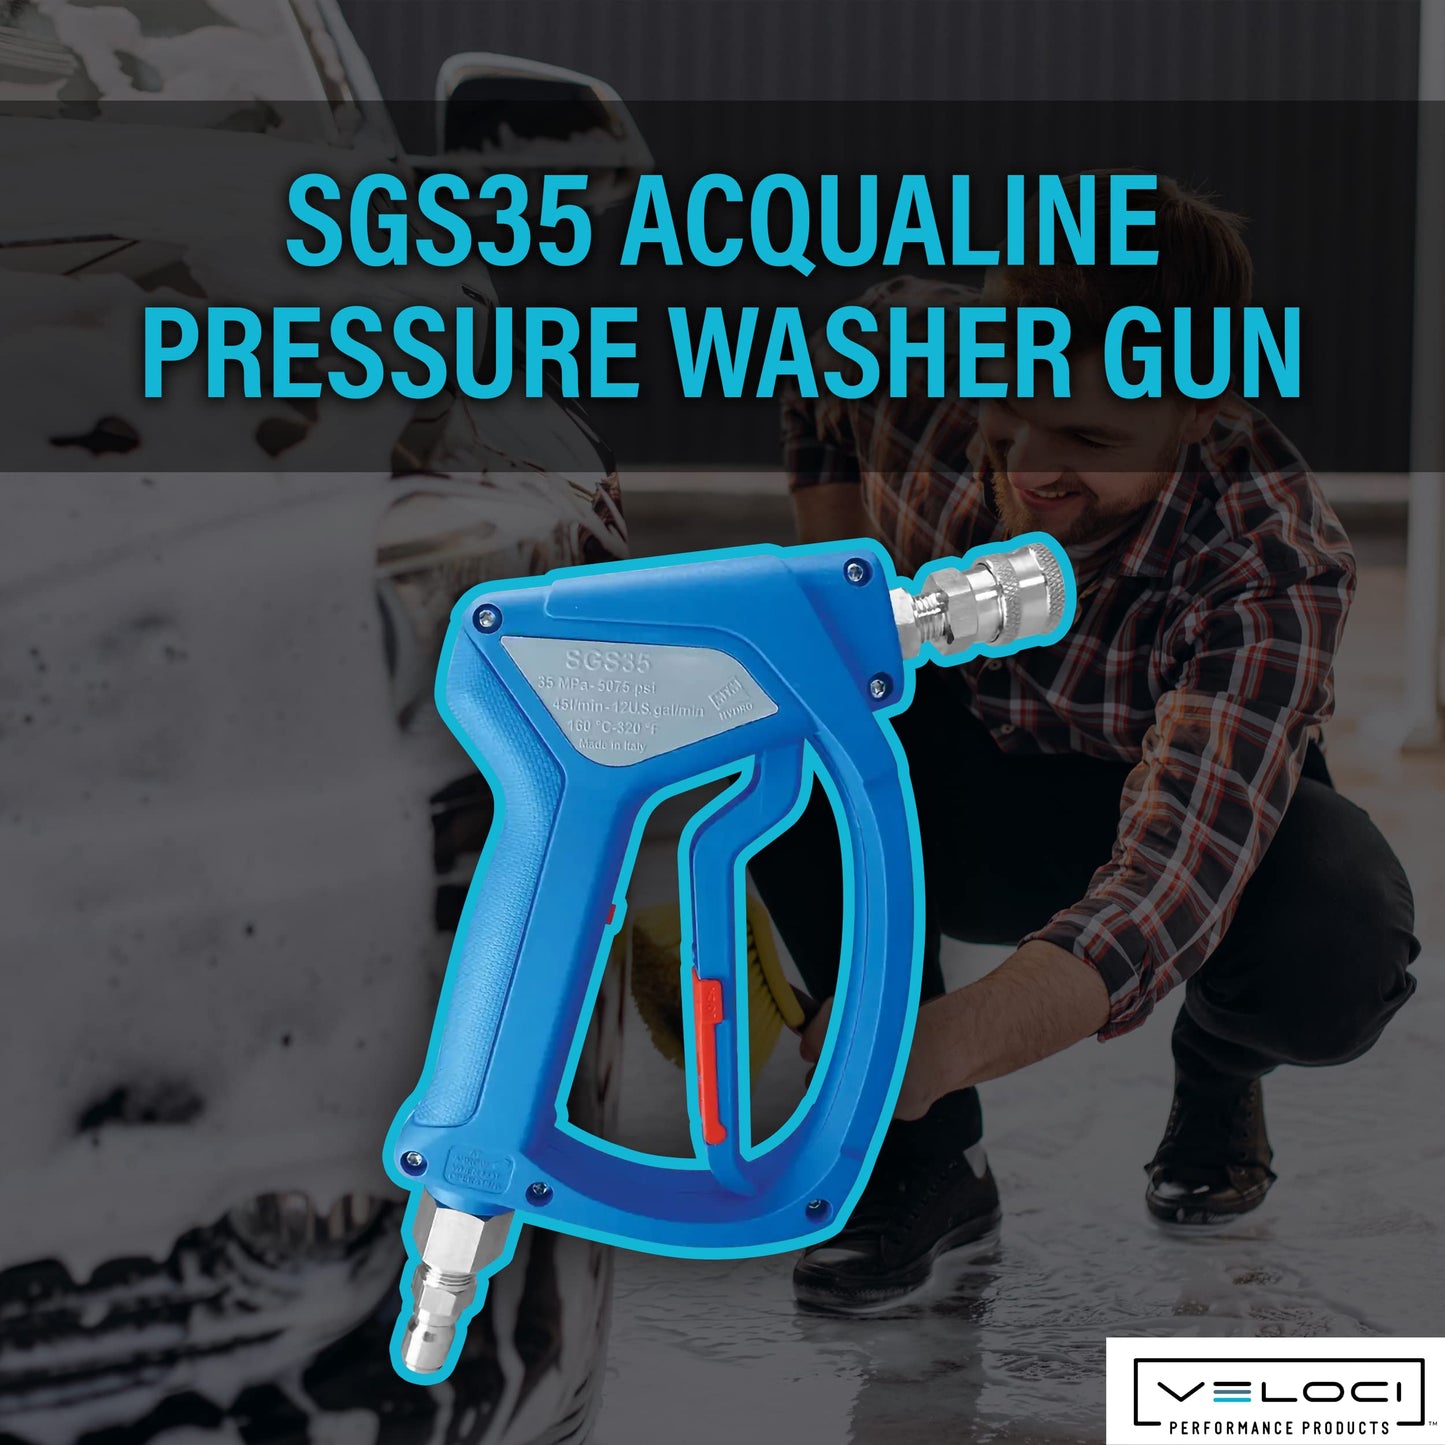 MTM Hydro Acqualine SGS35 Pressure Washer Car Wash Sprayer Gun with Stainless Steel Quick Connect Fittings and Live Swivel, High Pressure 4000 PSI Power Washer Car Washing Detailing